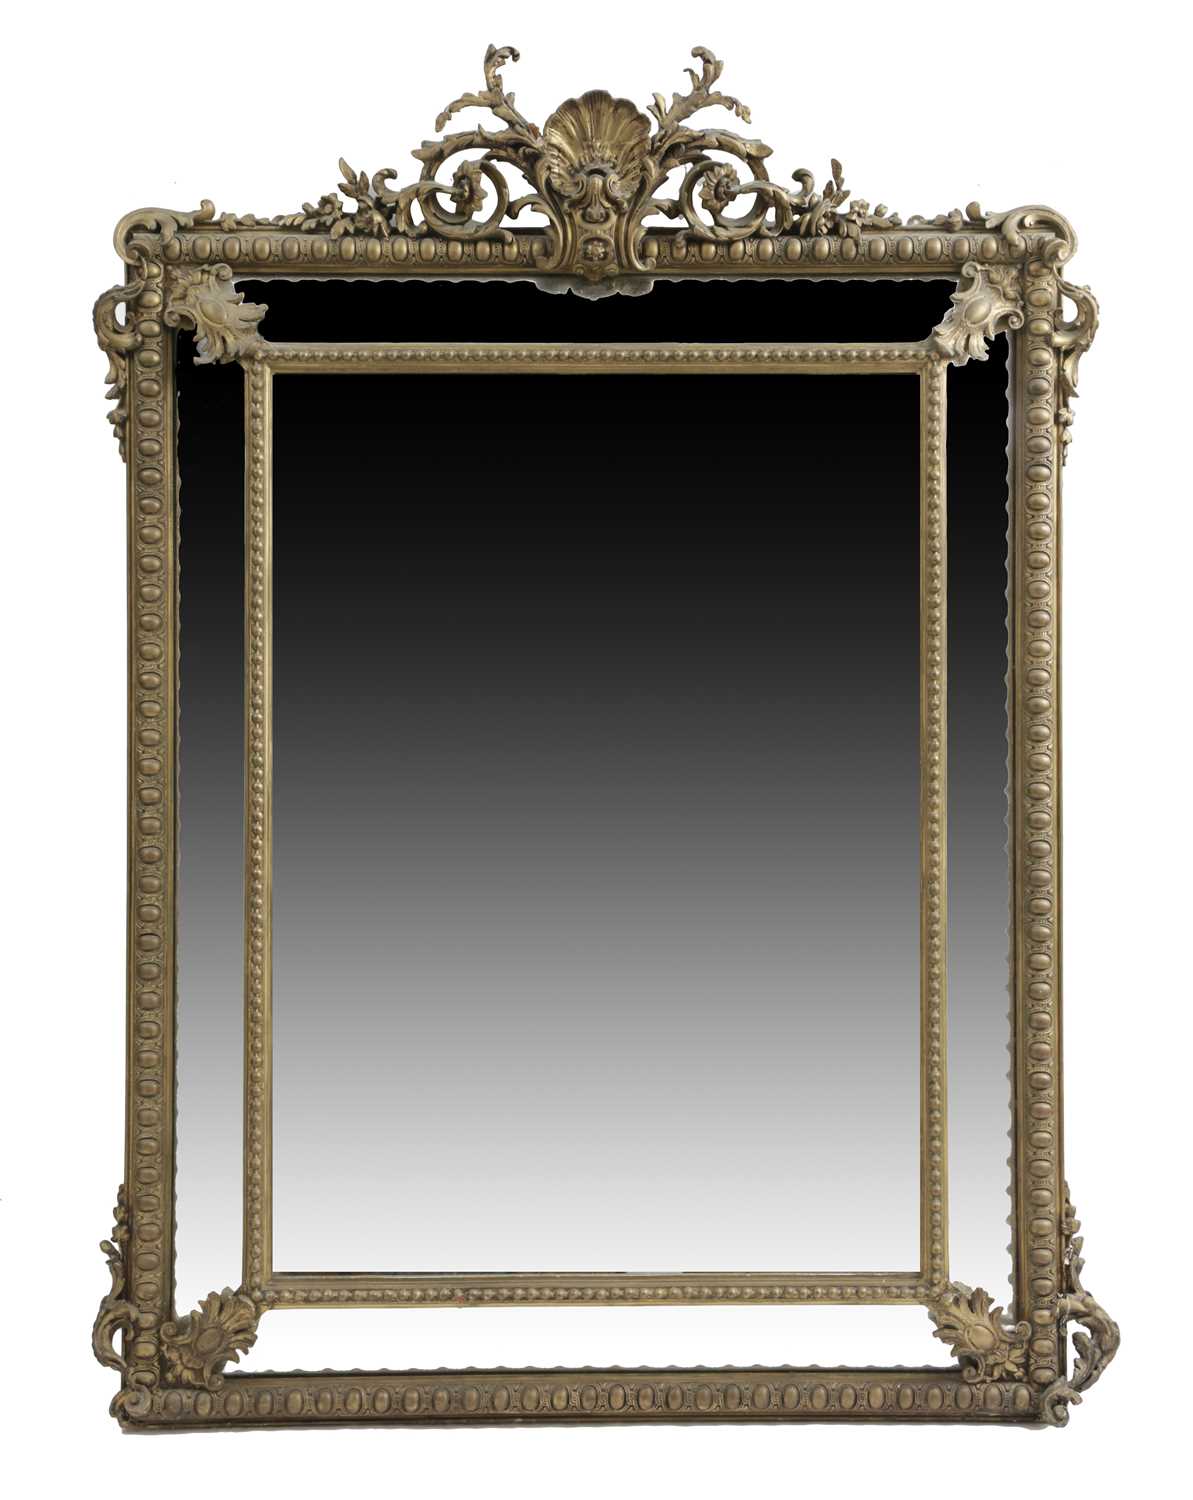 A FRENCH GILTWOOD AND COMPOSITION OVERMANTEL MIRROR IN LOUIS XV STYLE, 19TH CENTURY the